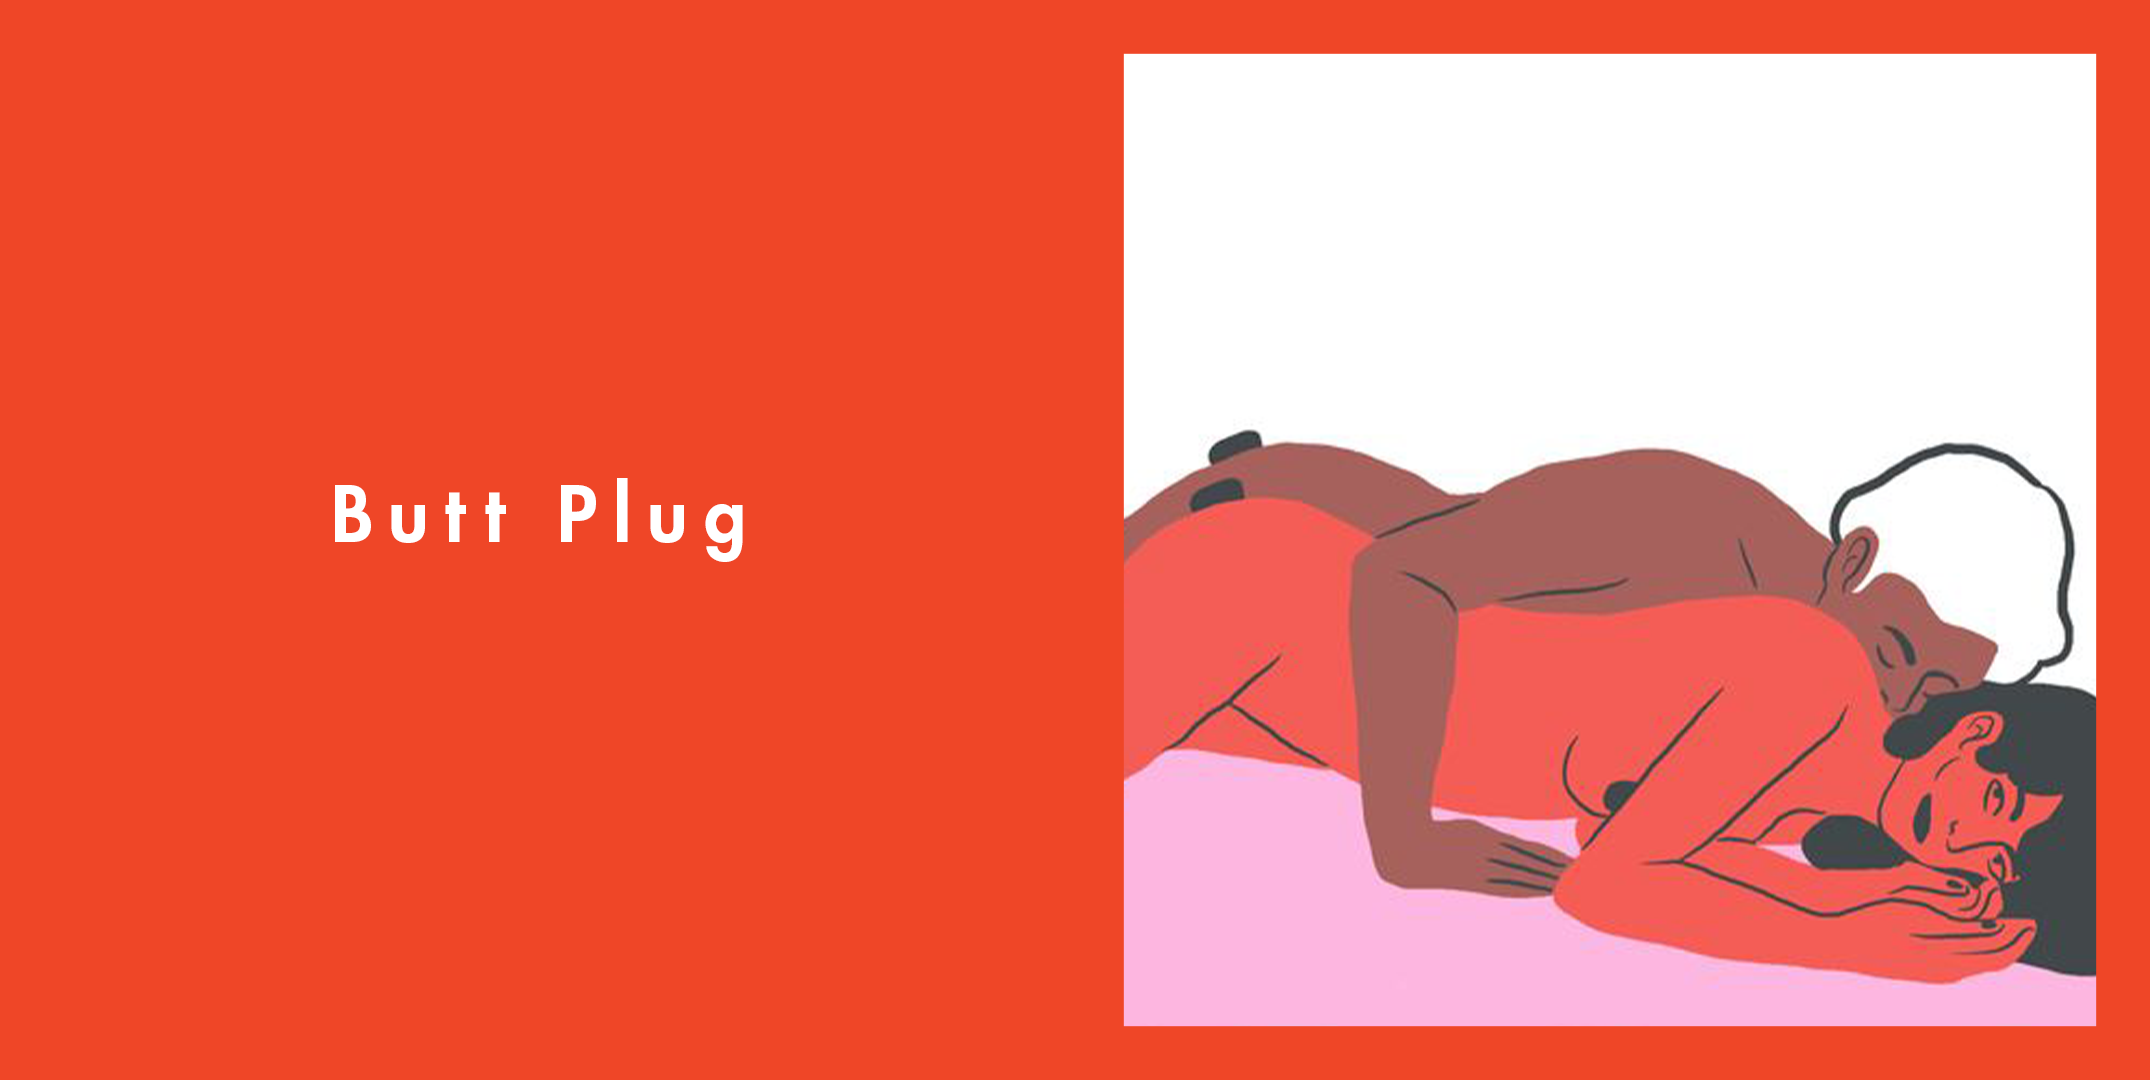 What's The Purpose Of A Butt Plug